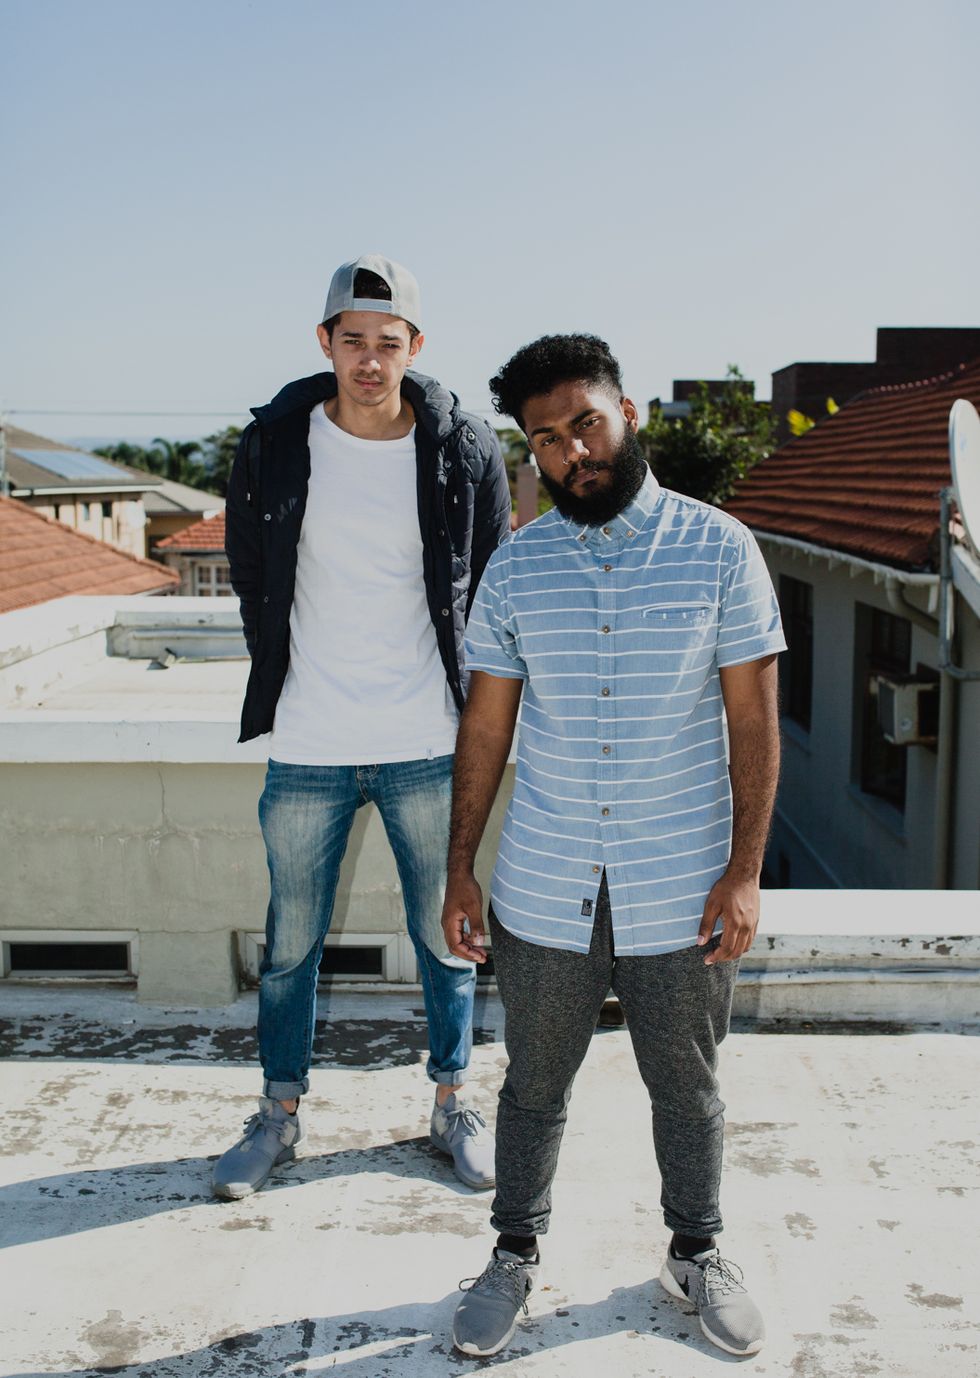 Meet SNAPBVCK, the New Durban Electronic Duo You Need to Know